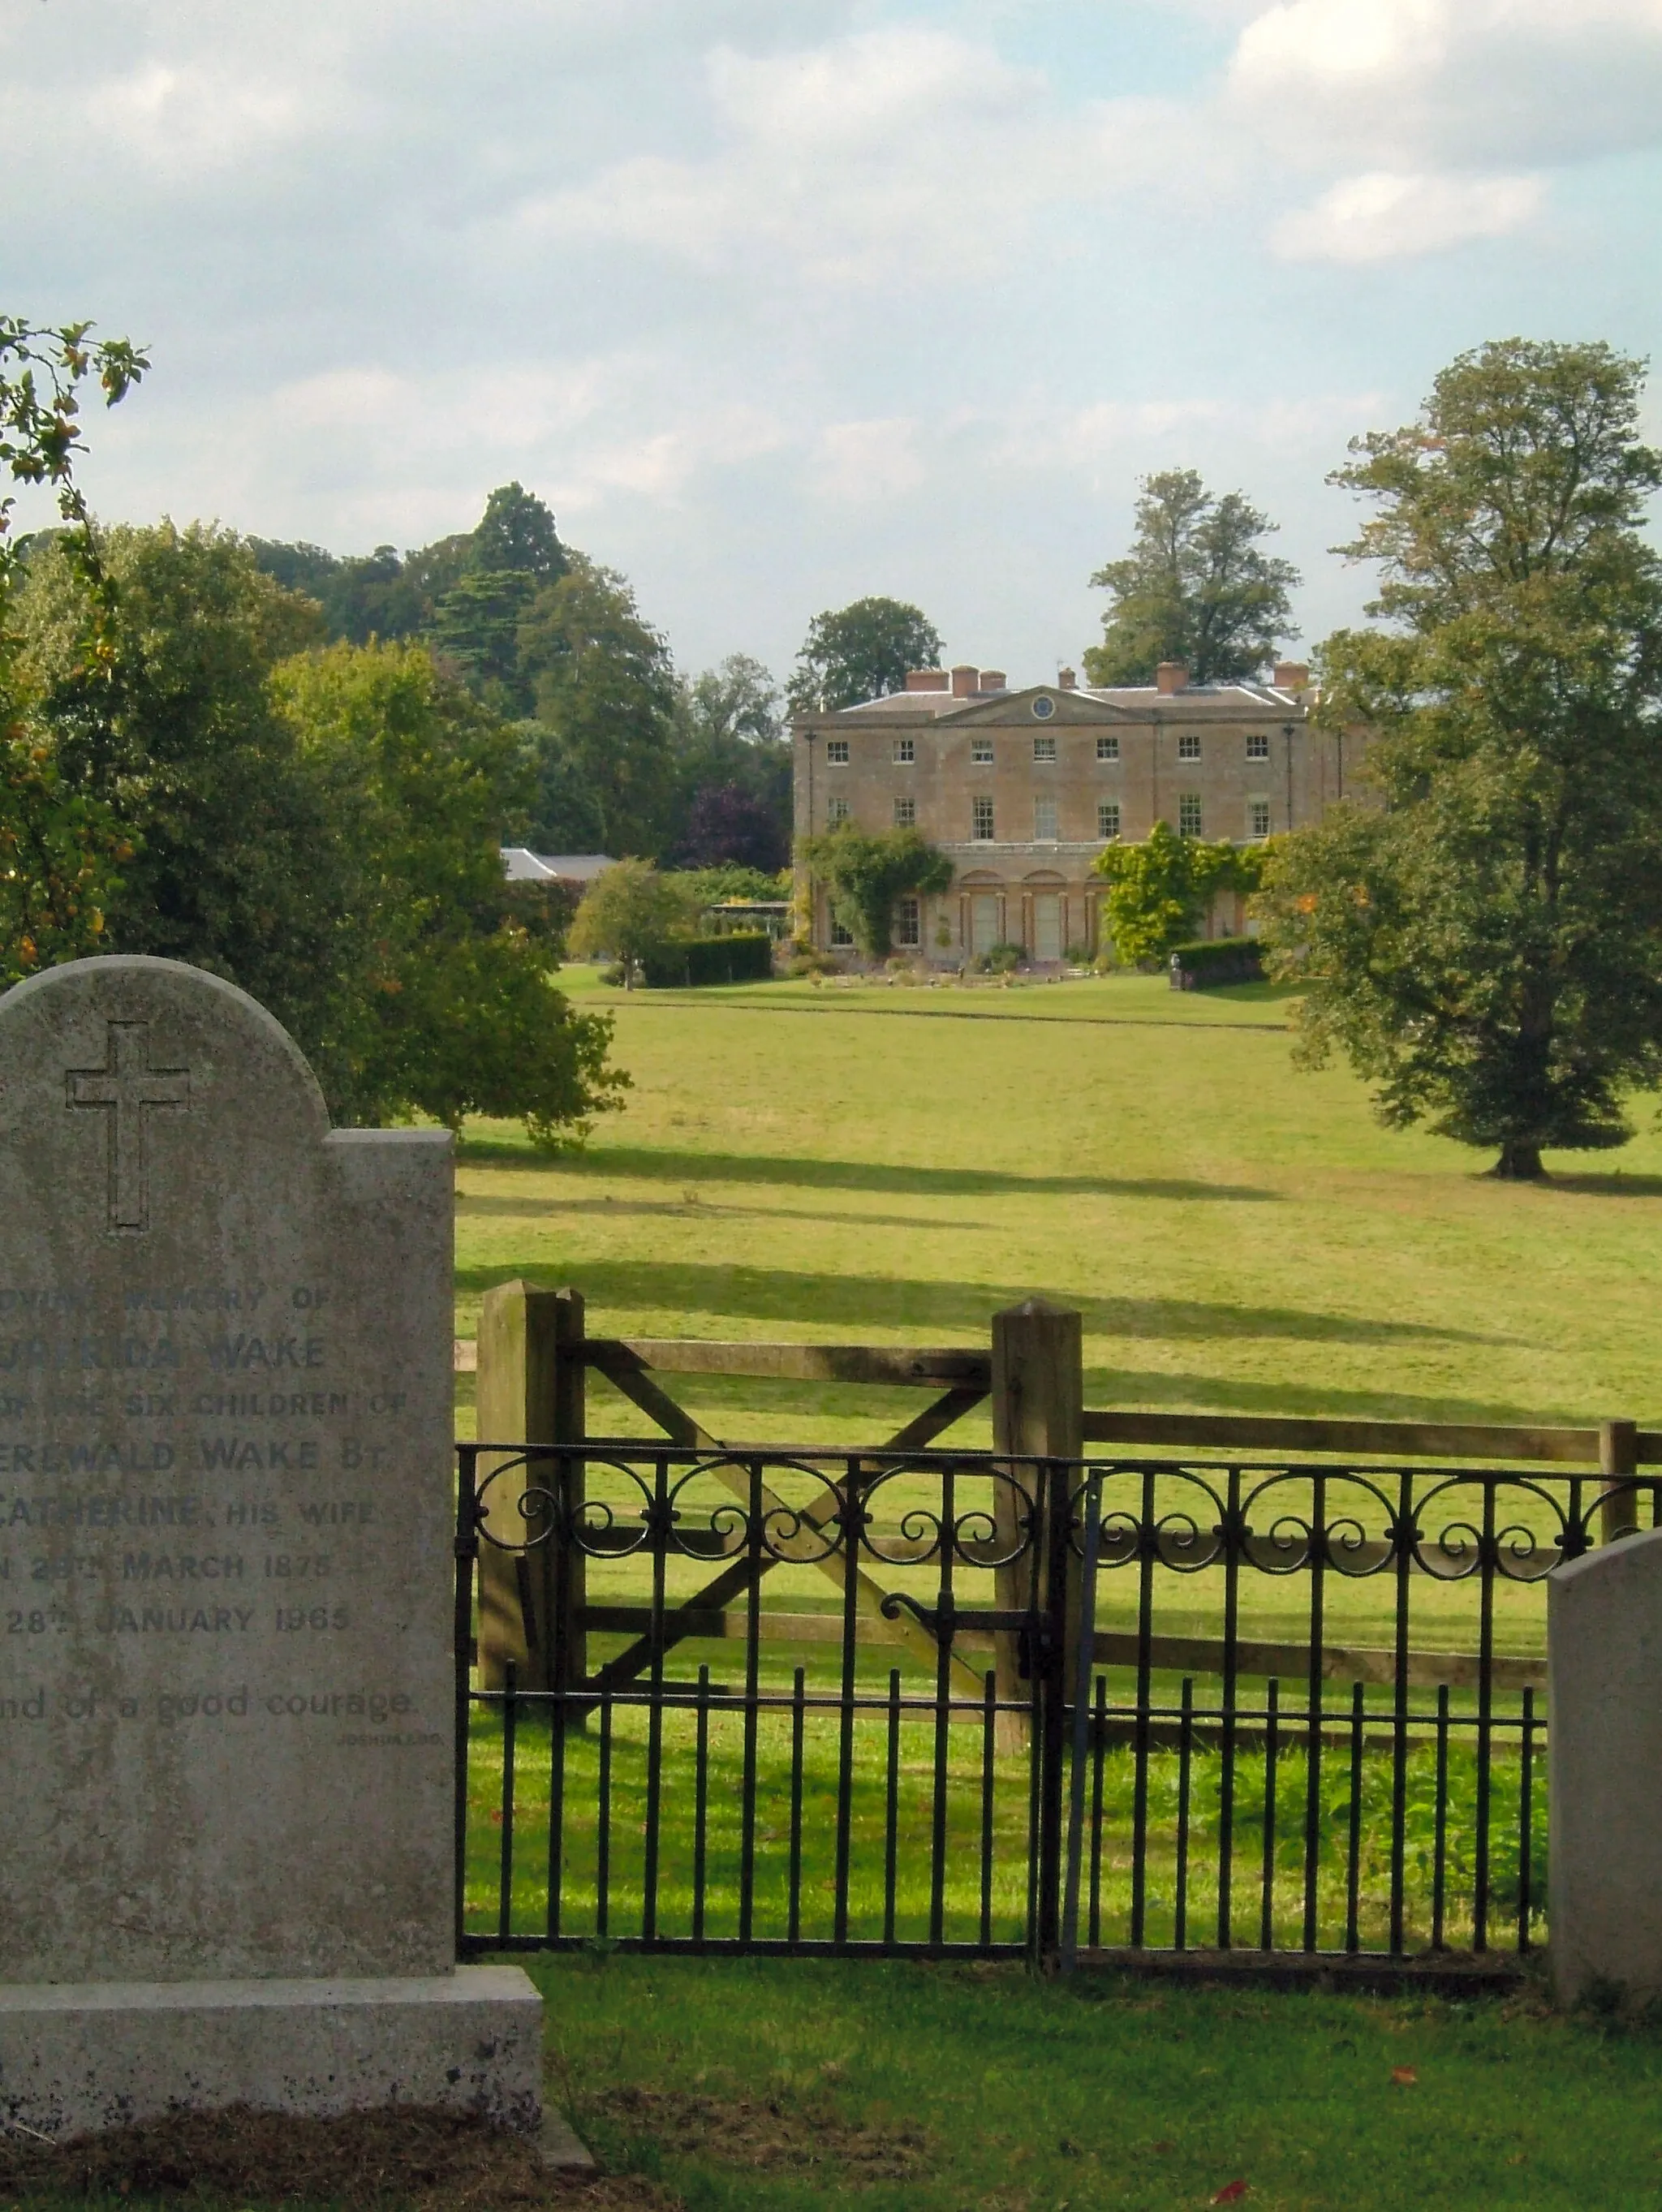 Photo showing: Courteenhall, Northamptonshire, England from the Churchyard in the village of the same name, taken September 2007